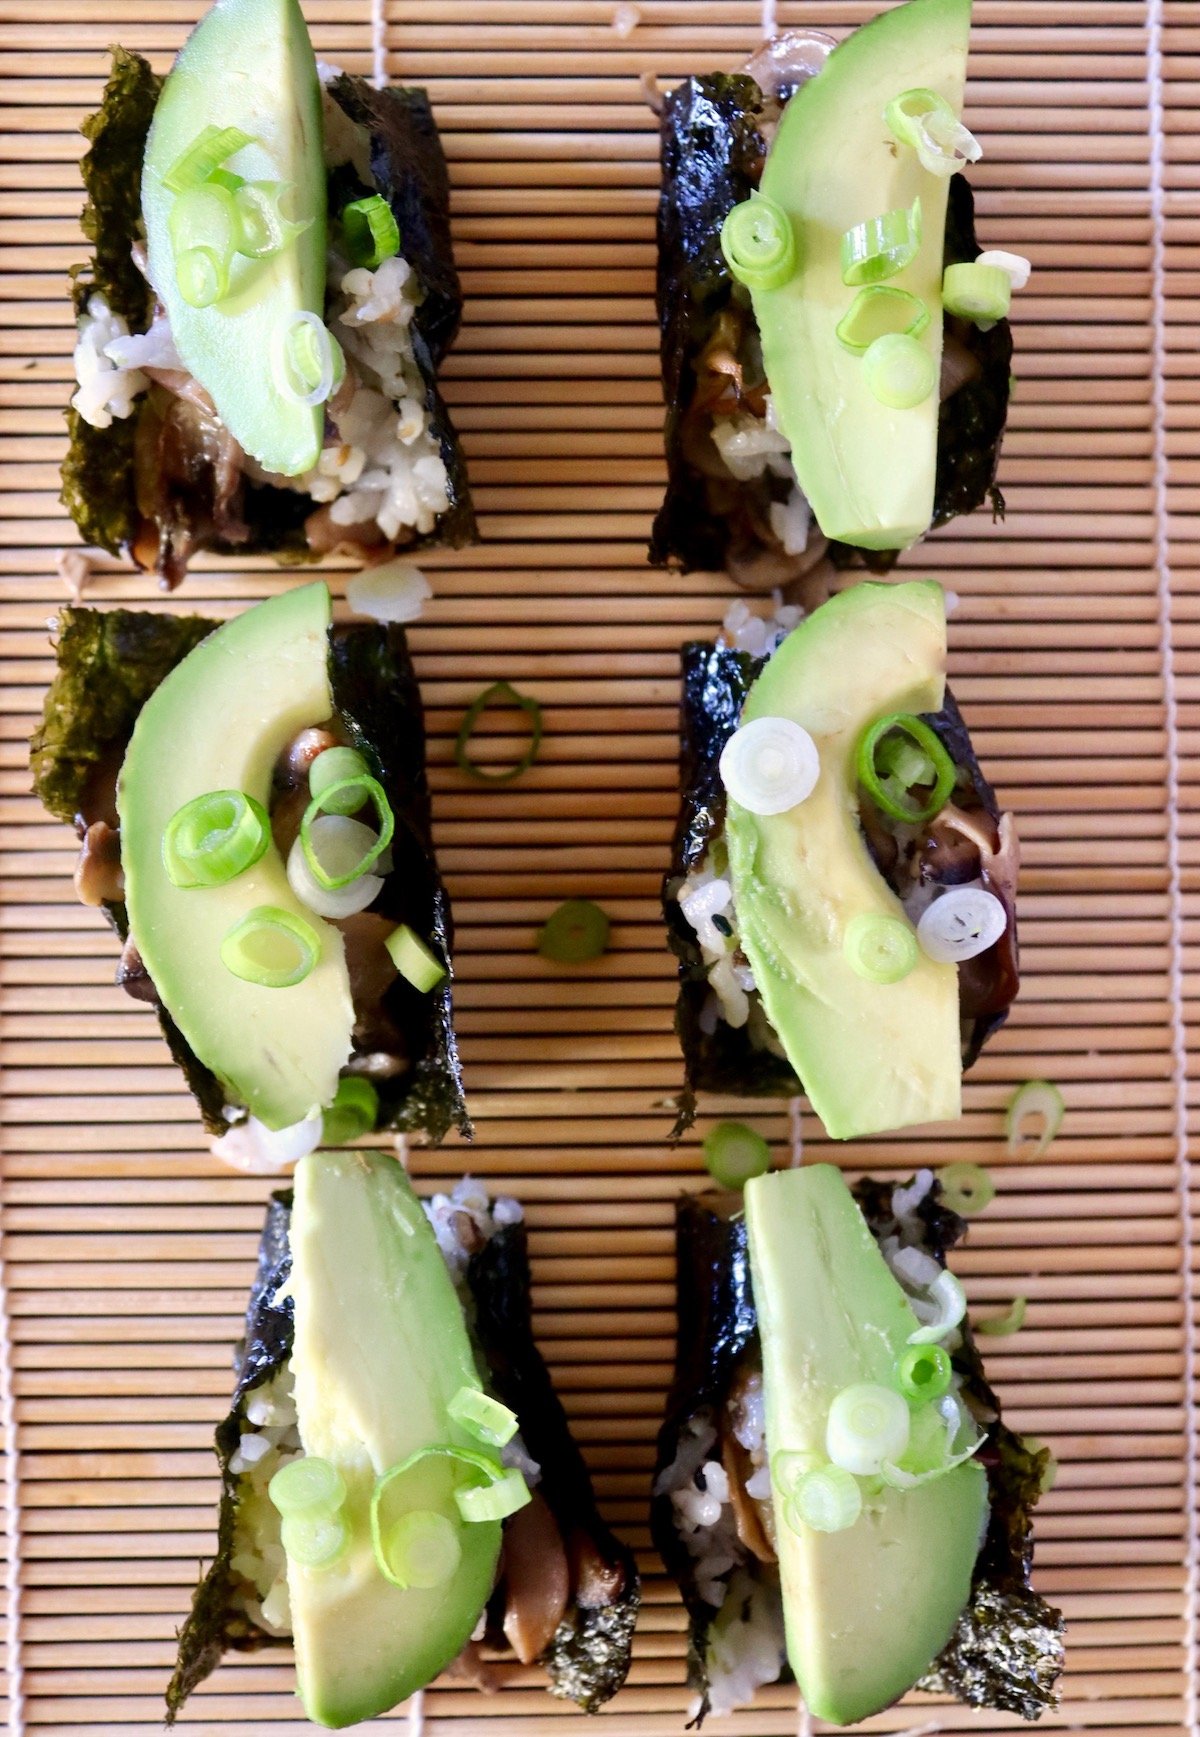 6 snack-sized Nori sheets on a sushi mat with rice-mushroom casserole and avocado inside.